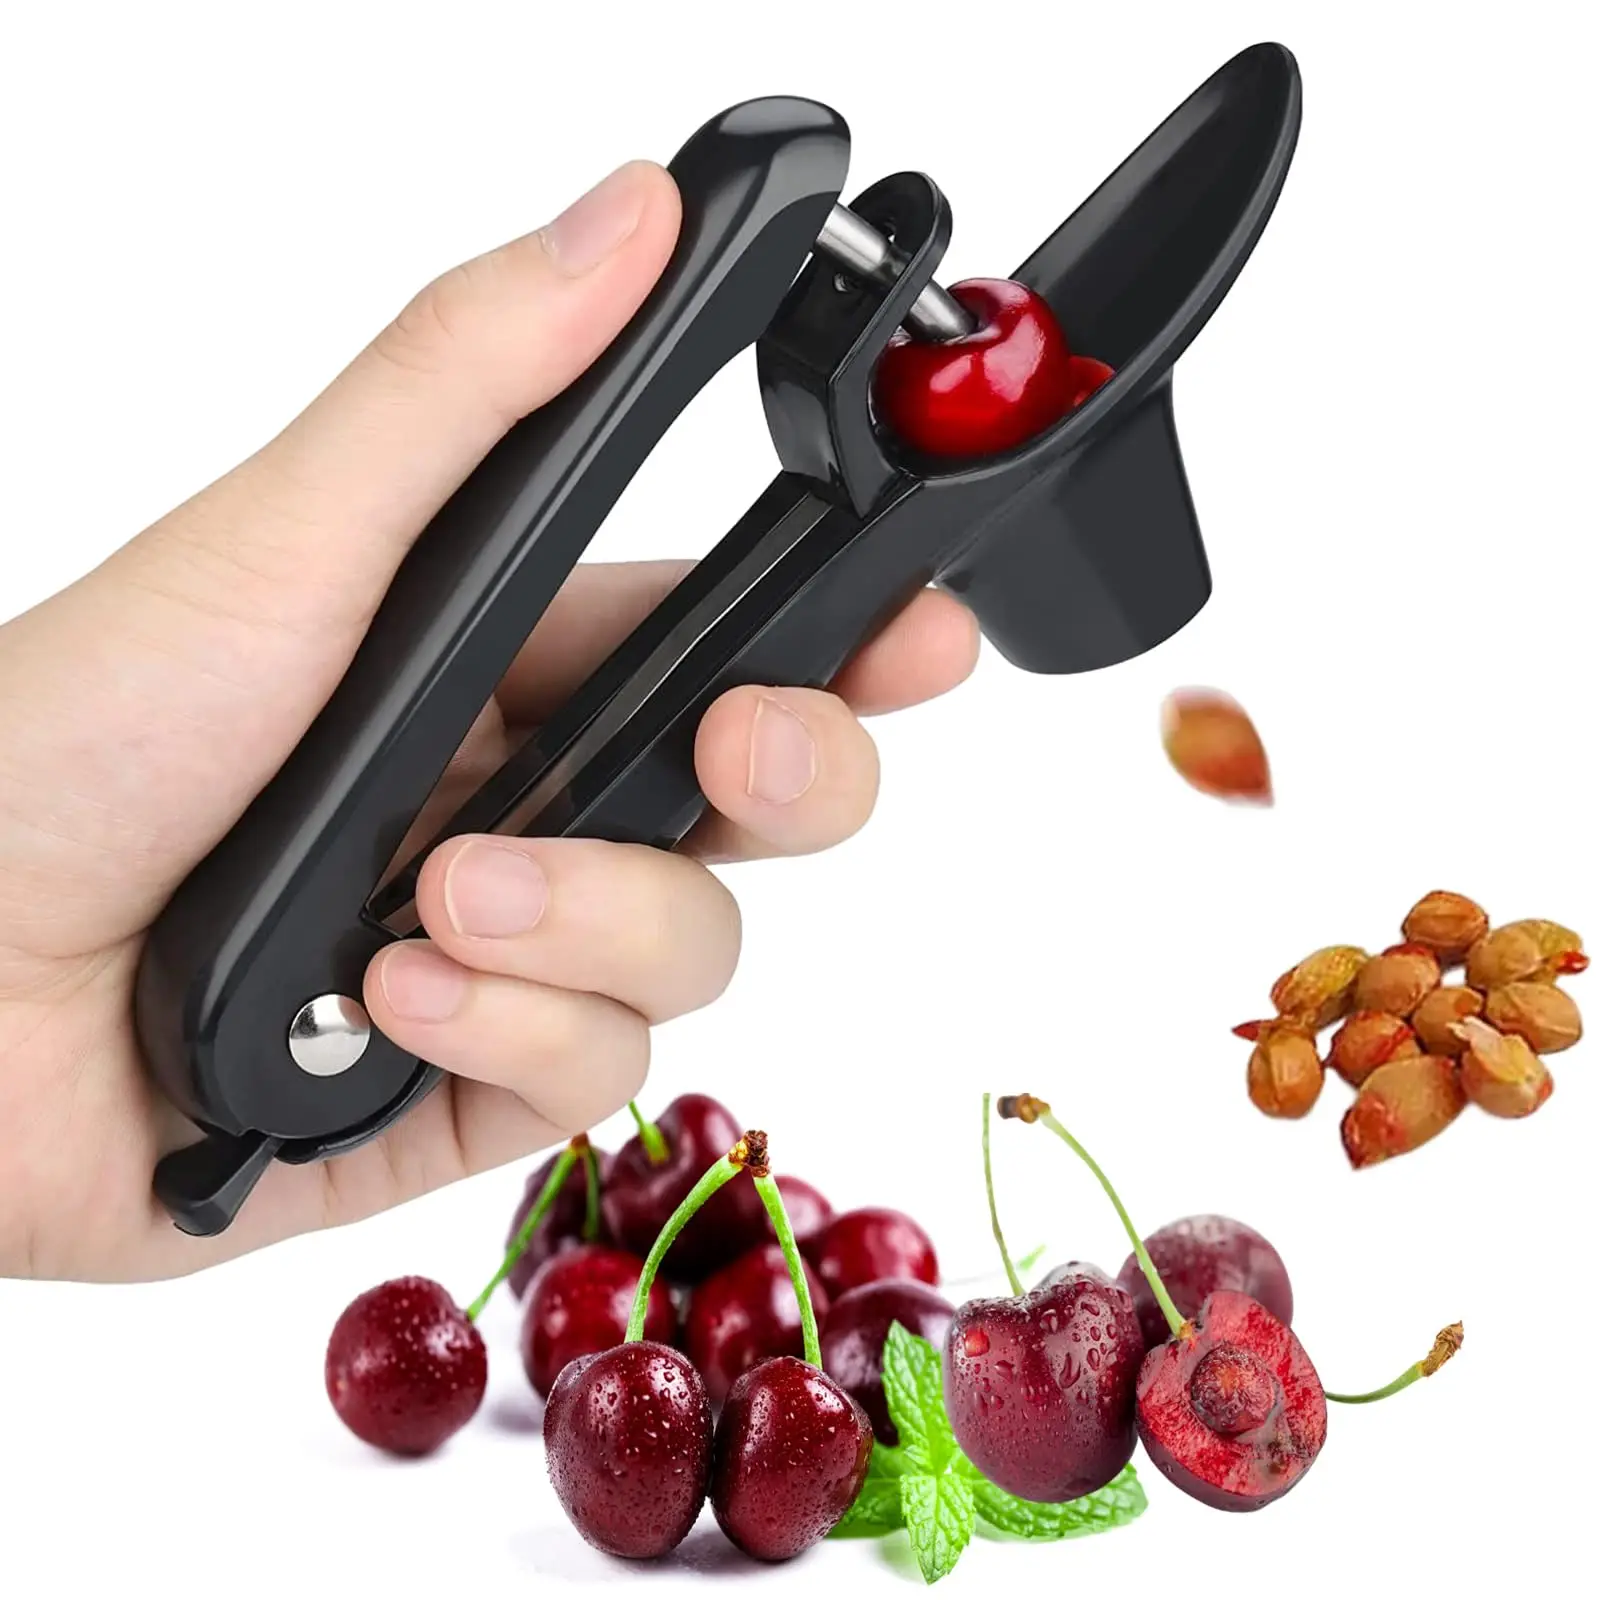 

Cherry Pitter Tool,Stainless Steel Pitting, Cherries Corer Stoner Seed Tool with Lock Design,Fruit Pit Remover for Cherry Jam